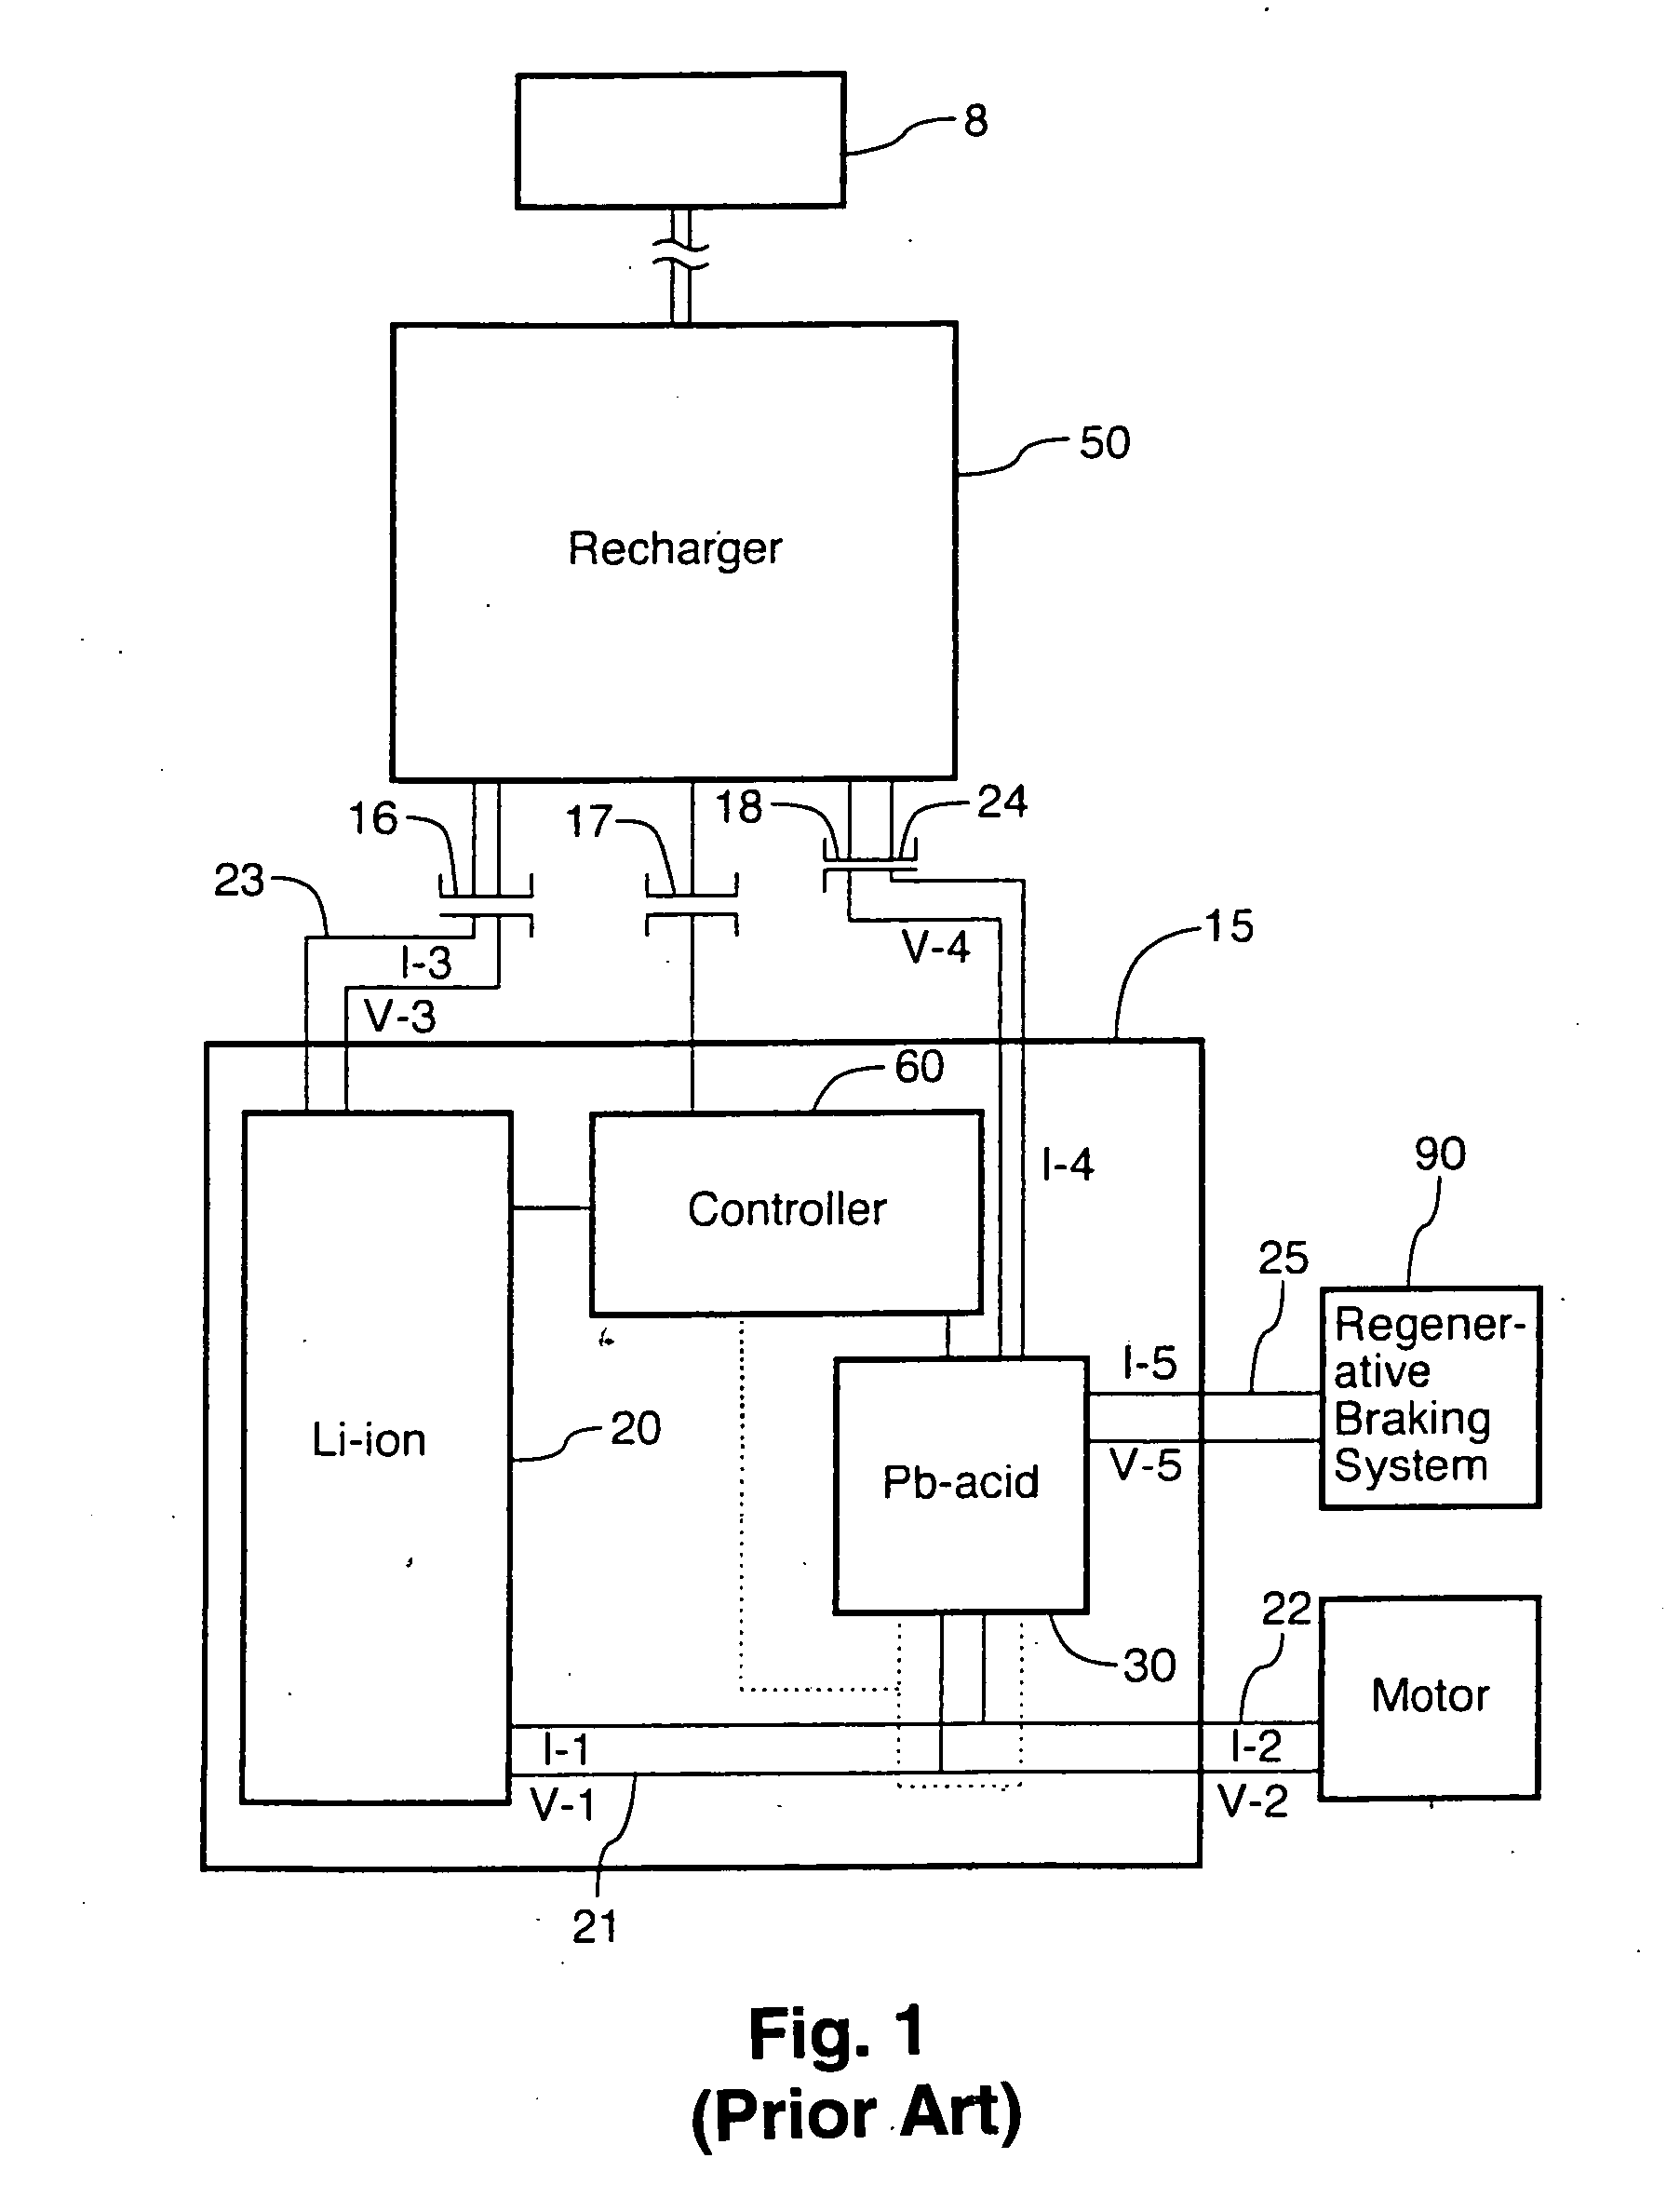 Battery powered vehicle overvoltage protection circuitry